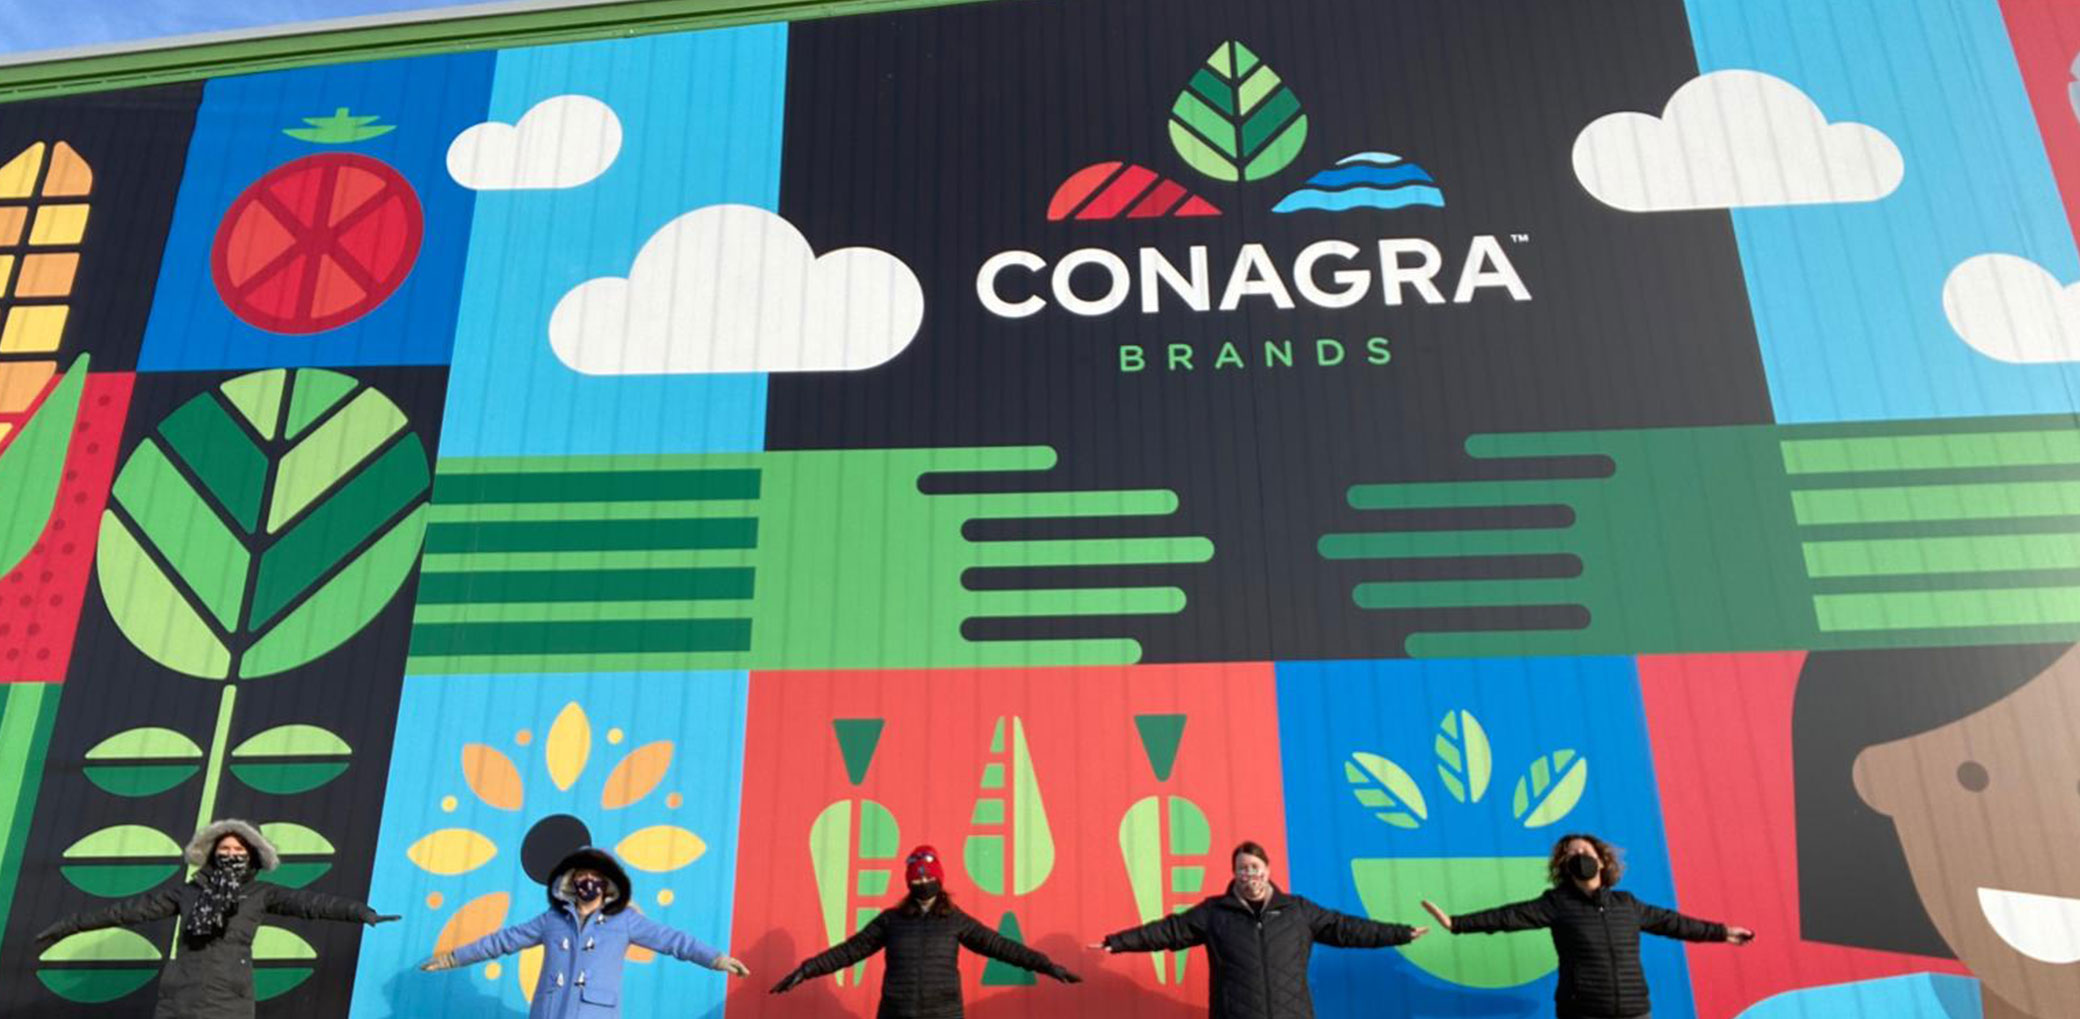 Five people with outstretched arms standing in front of a graphic, colorful Conagra mural